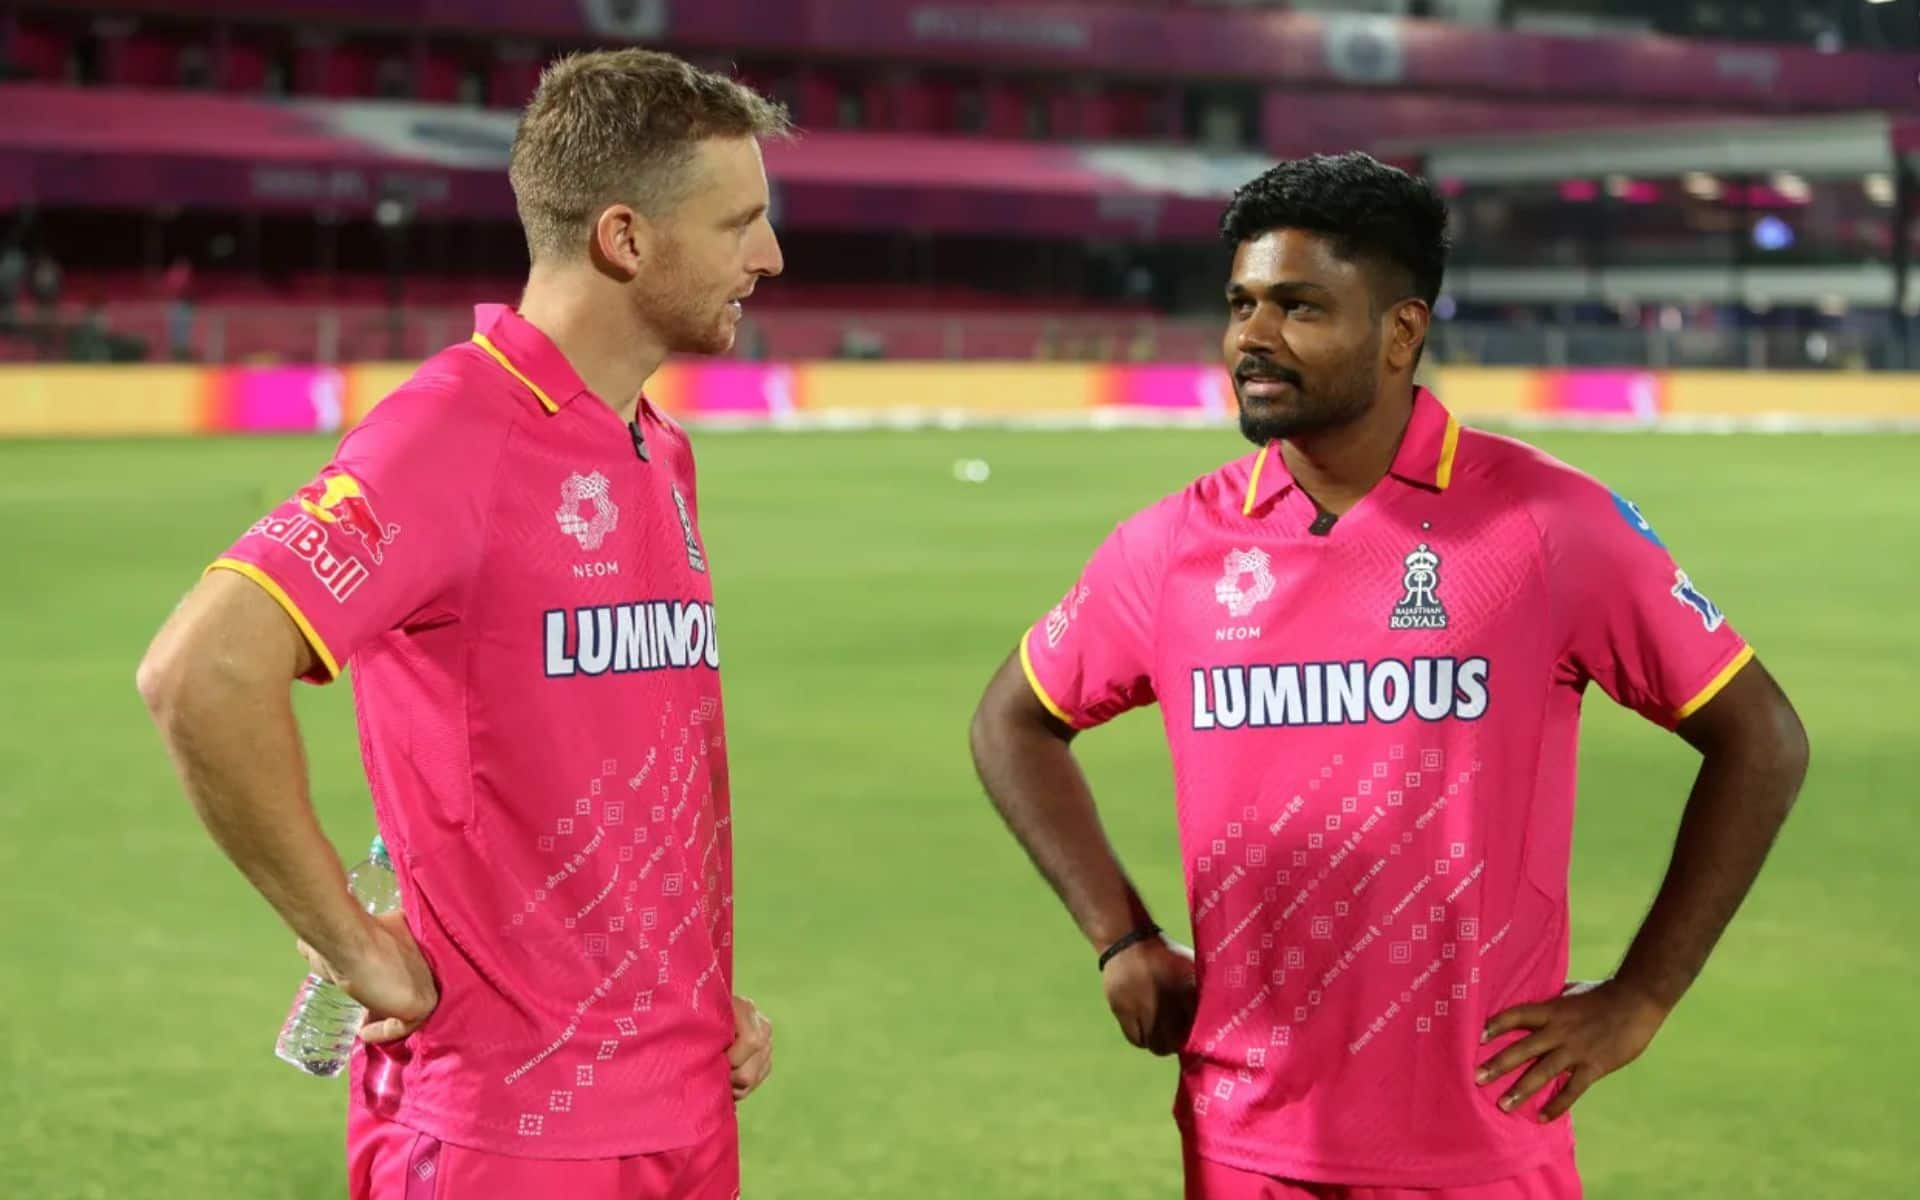 Our bowling Is... And Batting Is...' - Sanju Samson Rates His Team After RR vs RCB